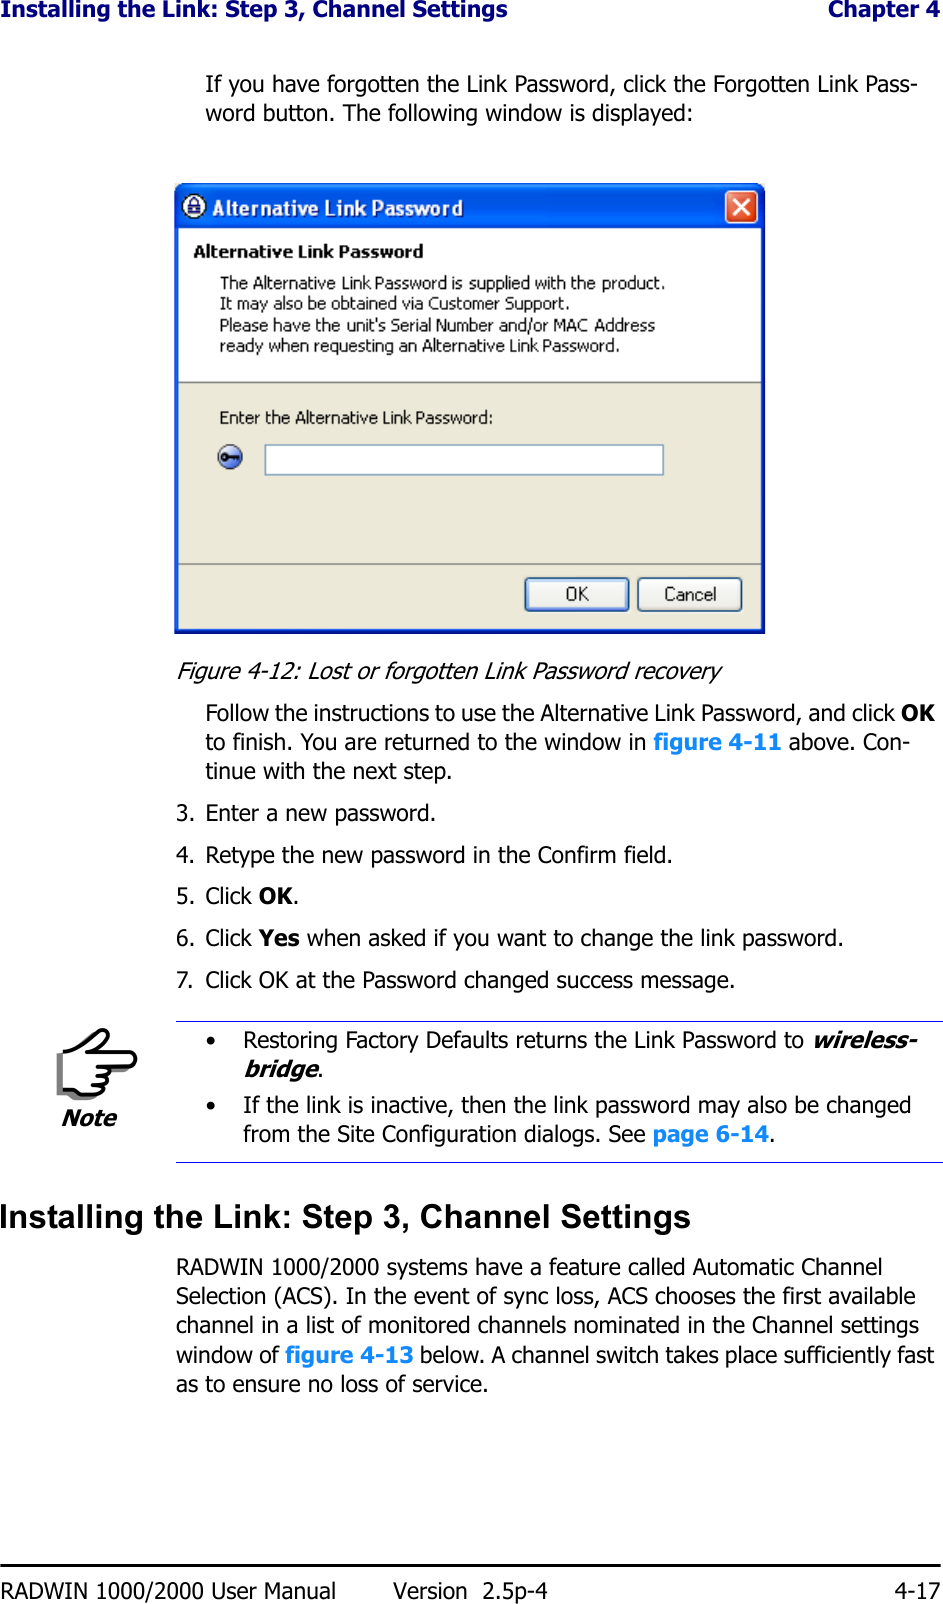 Installing the Link: Step 3, Channel Settings  Chapter 4RADWIN 1000/2000 User Manual Version  2.5p-4 4-17If you have forgotten the Link Password, click the Forgotten Link Pass-word button. The following window is displayed:Figure 4-12: Lost or forgotten Link Password recoveryFollow the instructions to use the Alternative Link Password, and click OK to finish. You are returned to the window in figure 4-11 above. Con-tinue with the next step.3. Enter a new password.4. Retype the new password in the Confirm field.5. Click OK.6. Click Yes when asked if you want to change the link password.7. Click OK at the Password changed success message.Installing the Link: Step 3, Channel SettingsRADWIN 1000/2000 systems have a feature called Automatic Channel Selection (ACS). In the event of sync loss, ACS chooses the first available channel in a list of monitored channels nominated in the Channel settings window of figure 4-13 below. A channel switch takes place sufficiently fast as to ensure no loss of service.Note• Restoring Factory Defaults returns the Link Password to wireless-bridge.• If the link is inactive, then the link password may also be changed from the Site Configuration dialogs. See page 6-14.